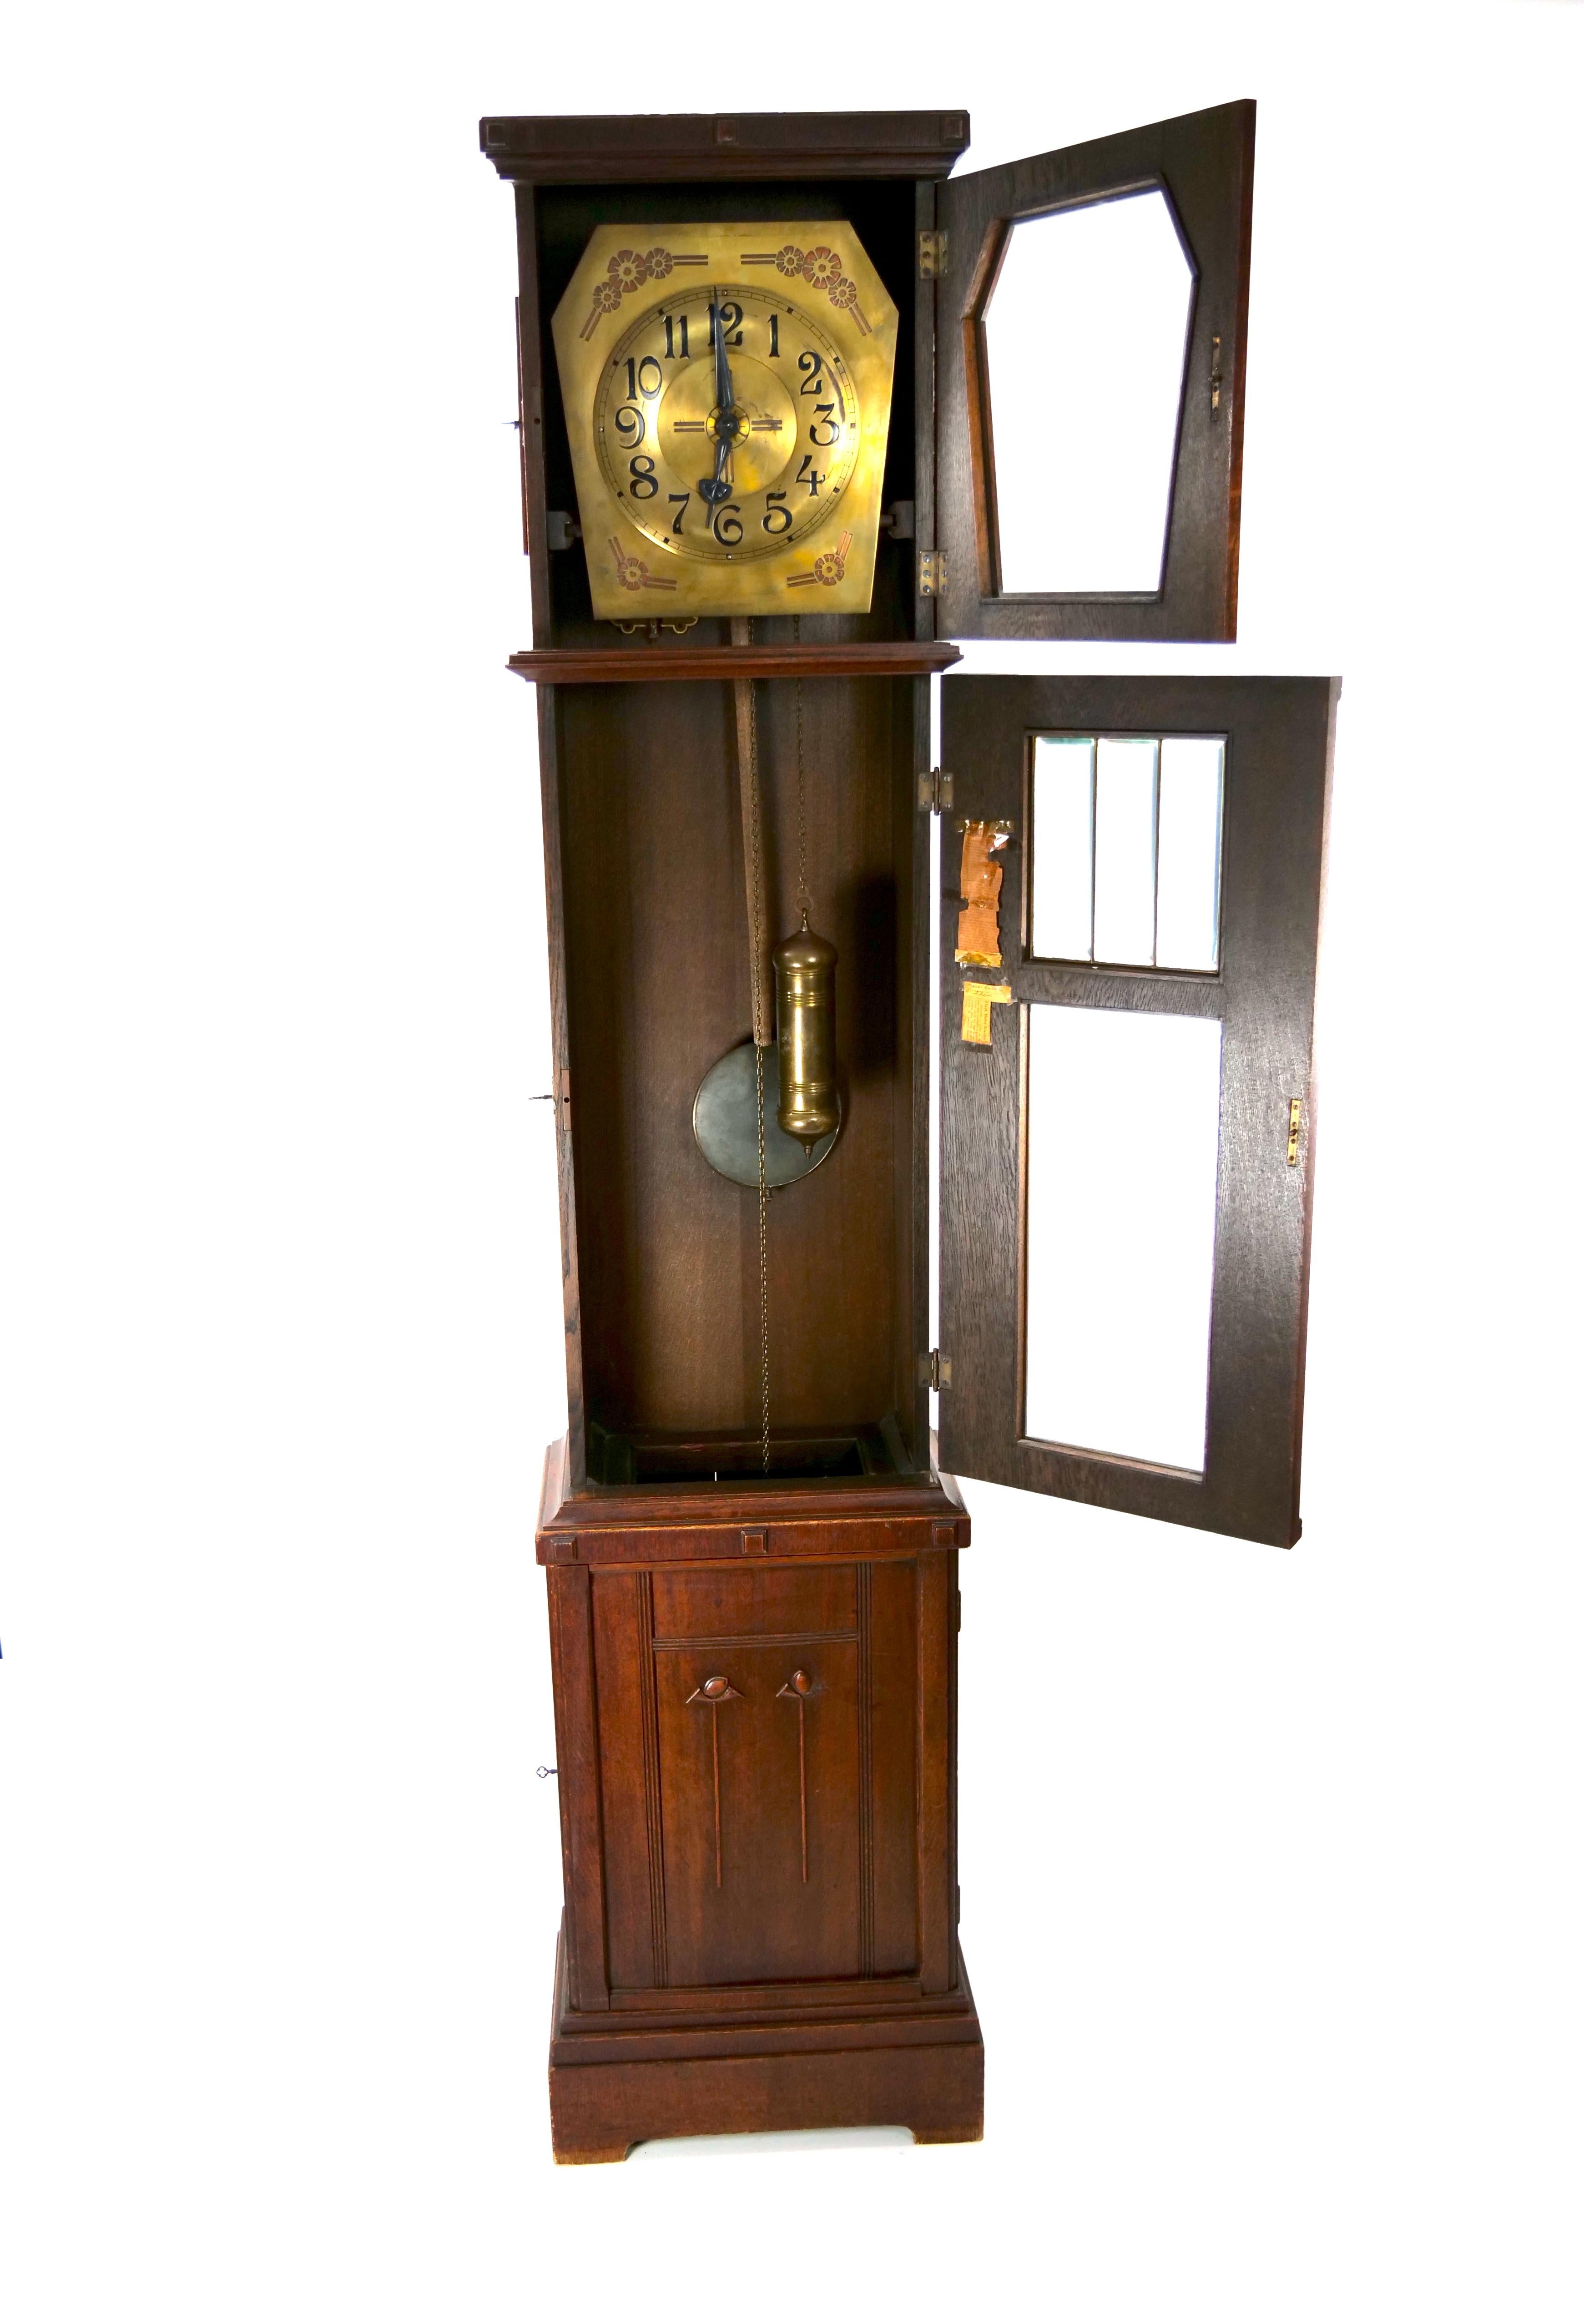 Mid-19th century oak frame with gilt brass and glass tall case clock. The case clock is in good condition with appropriate wear consistent with age / use. Maker's mark inscribe. The tall case clock measure 83 inches high x 17 inches wide x 9 1/2